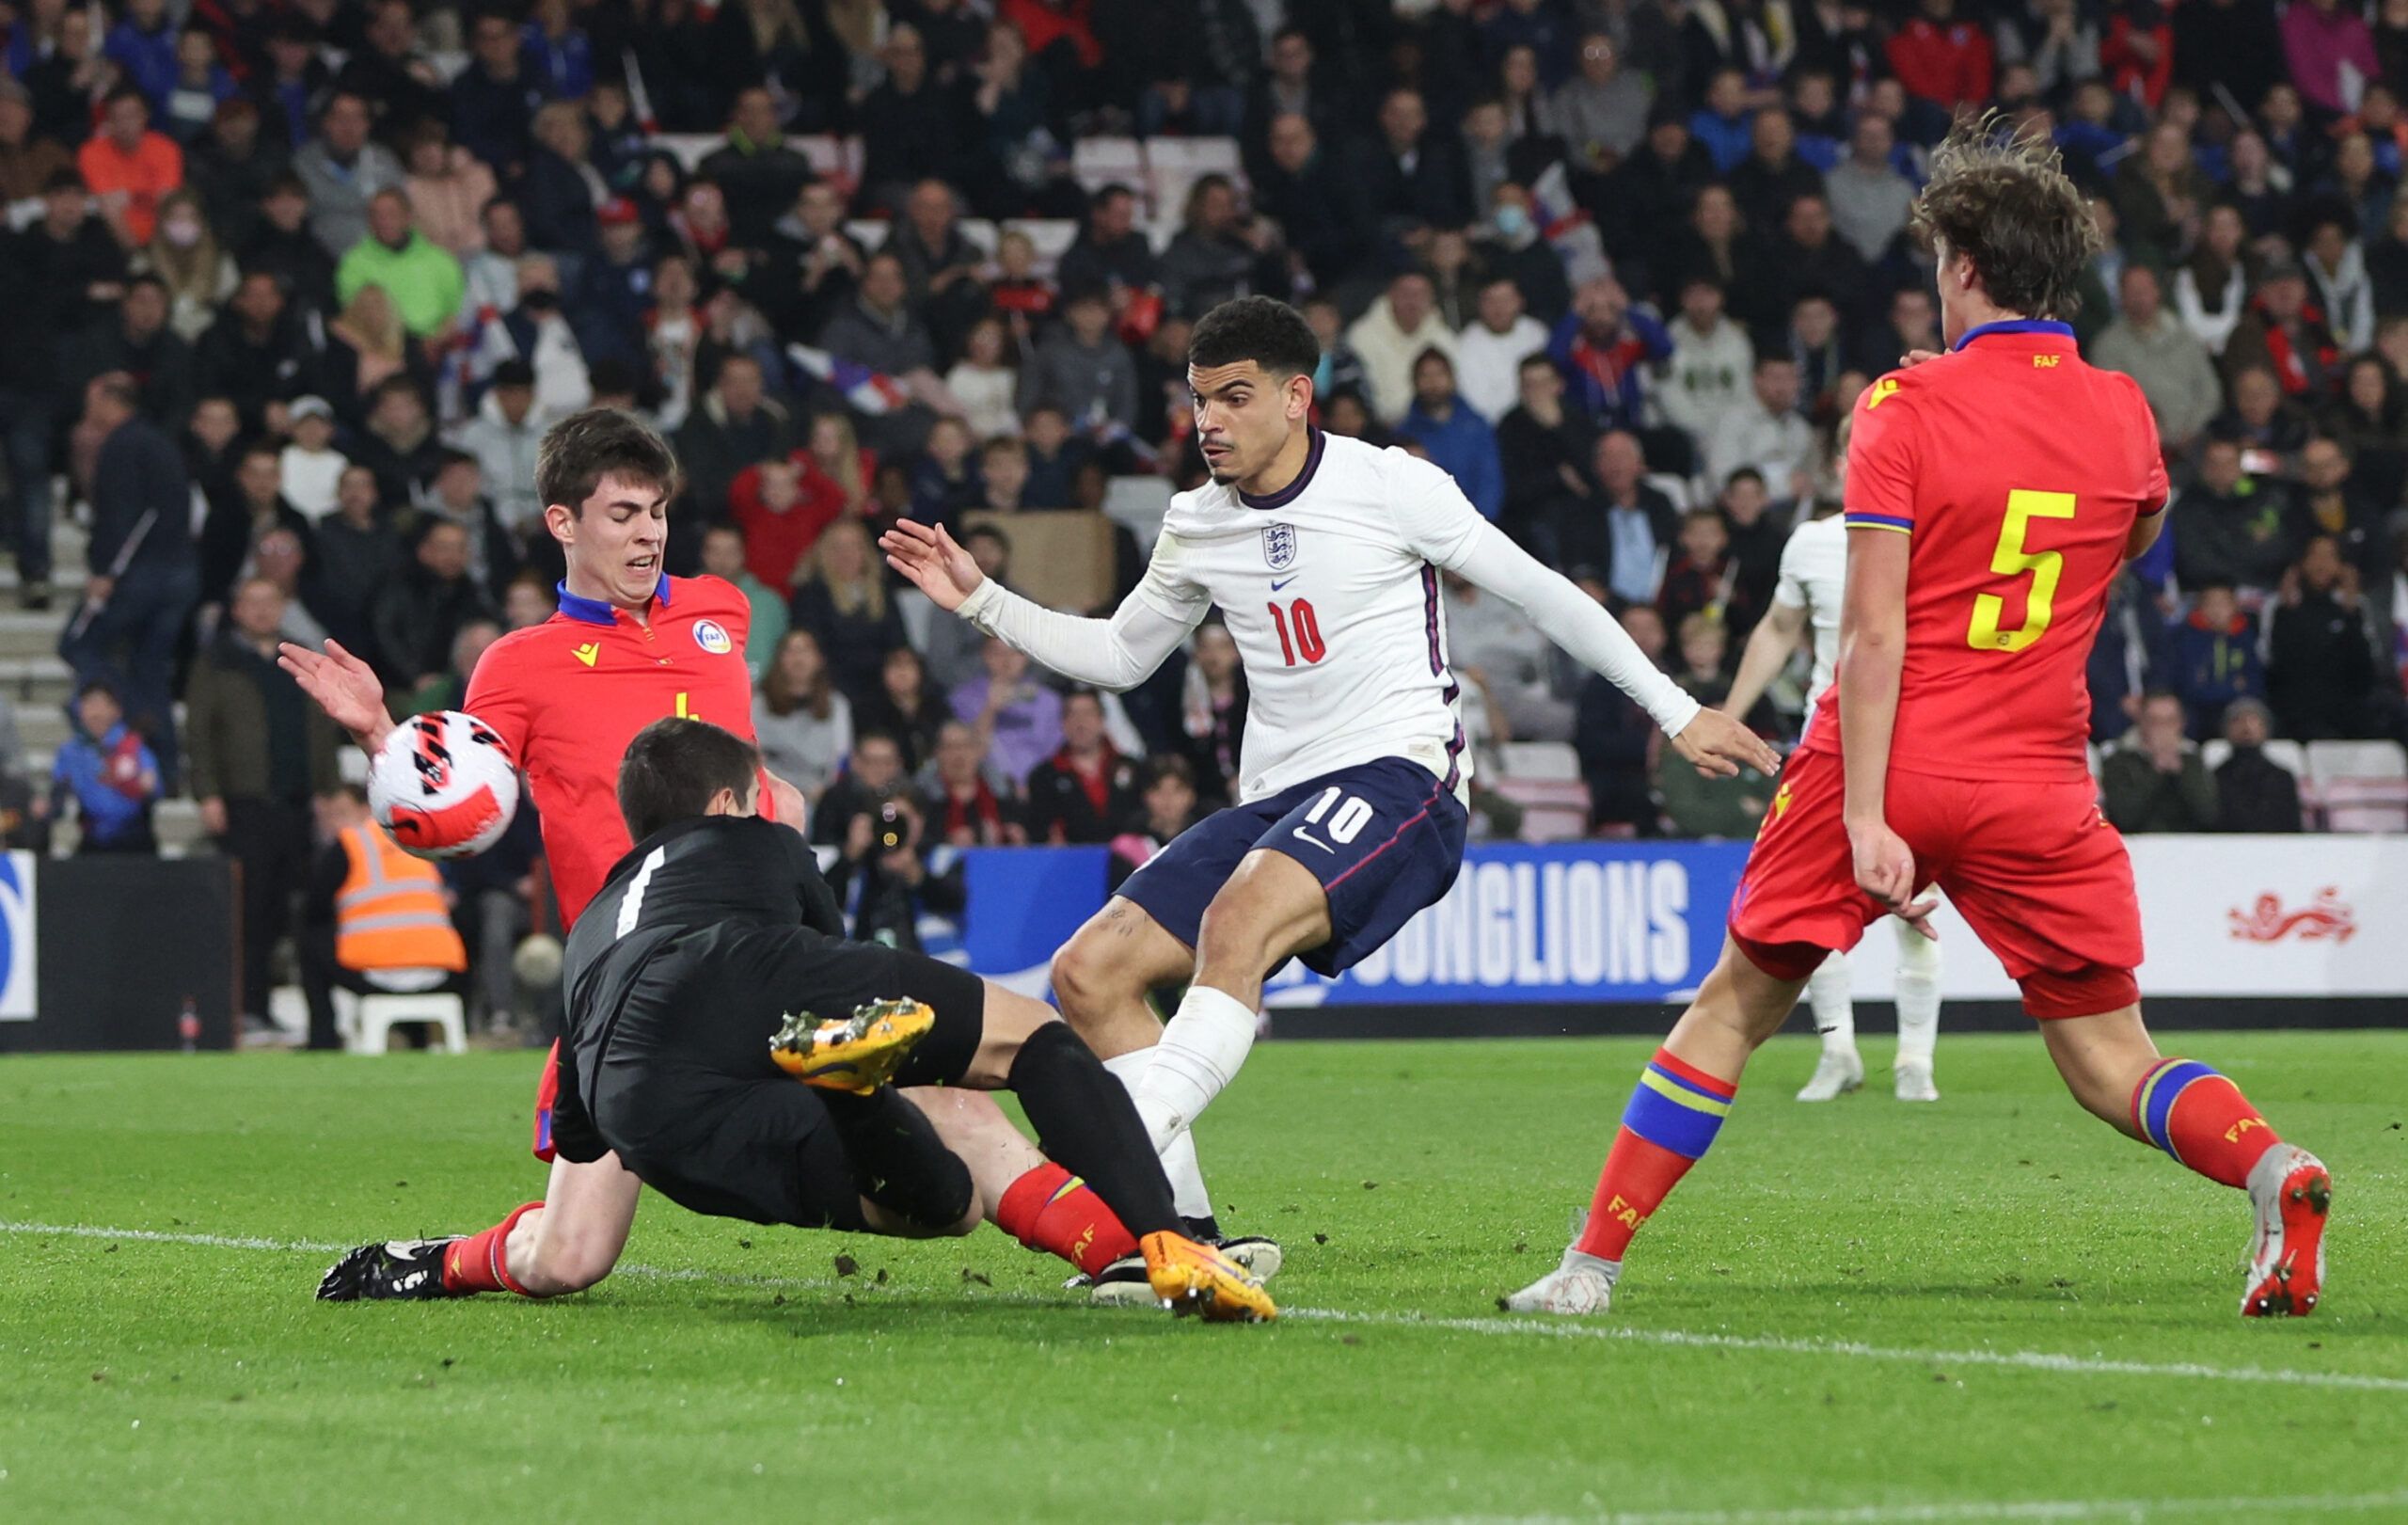 Soccer Football - European Under-21 Championship Qualifiers - England v Andorra - Vitality Stadium, Bournemouth, Britain - March 25, 2022 England's Morgan Gibbs-White scores their third goal Action Images via Reuters/Paul Childs